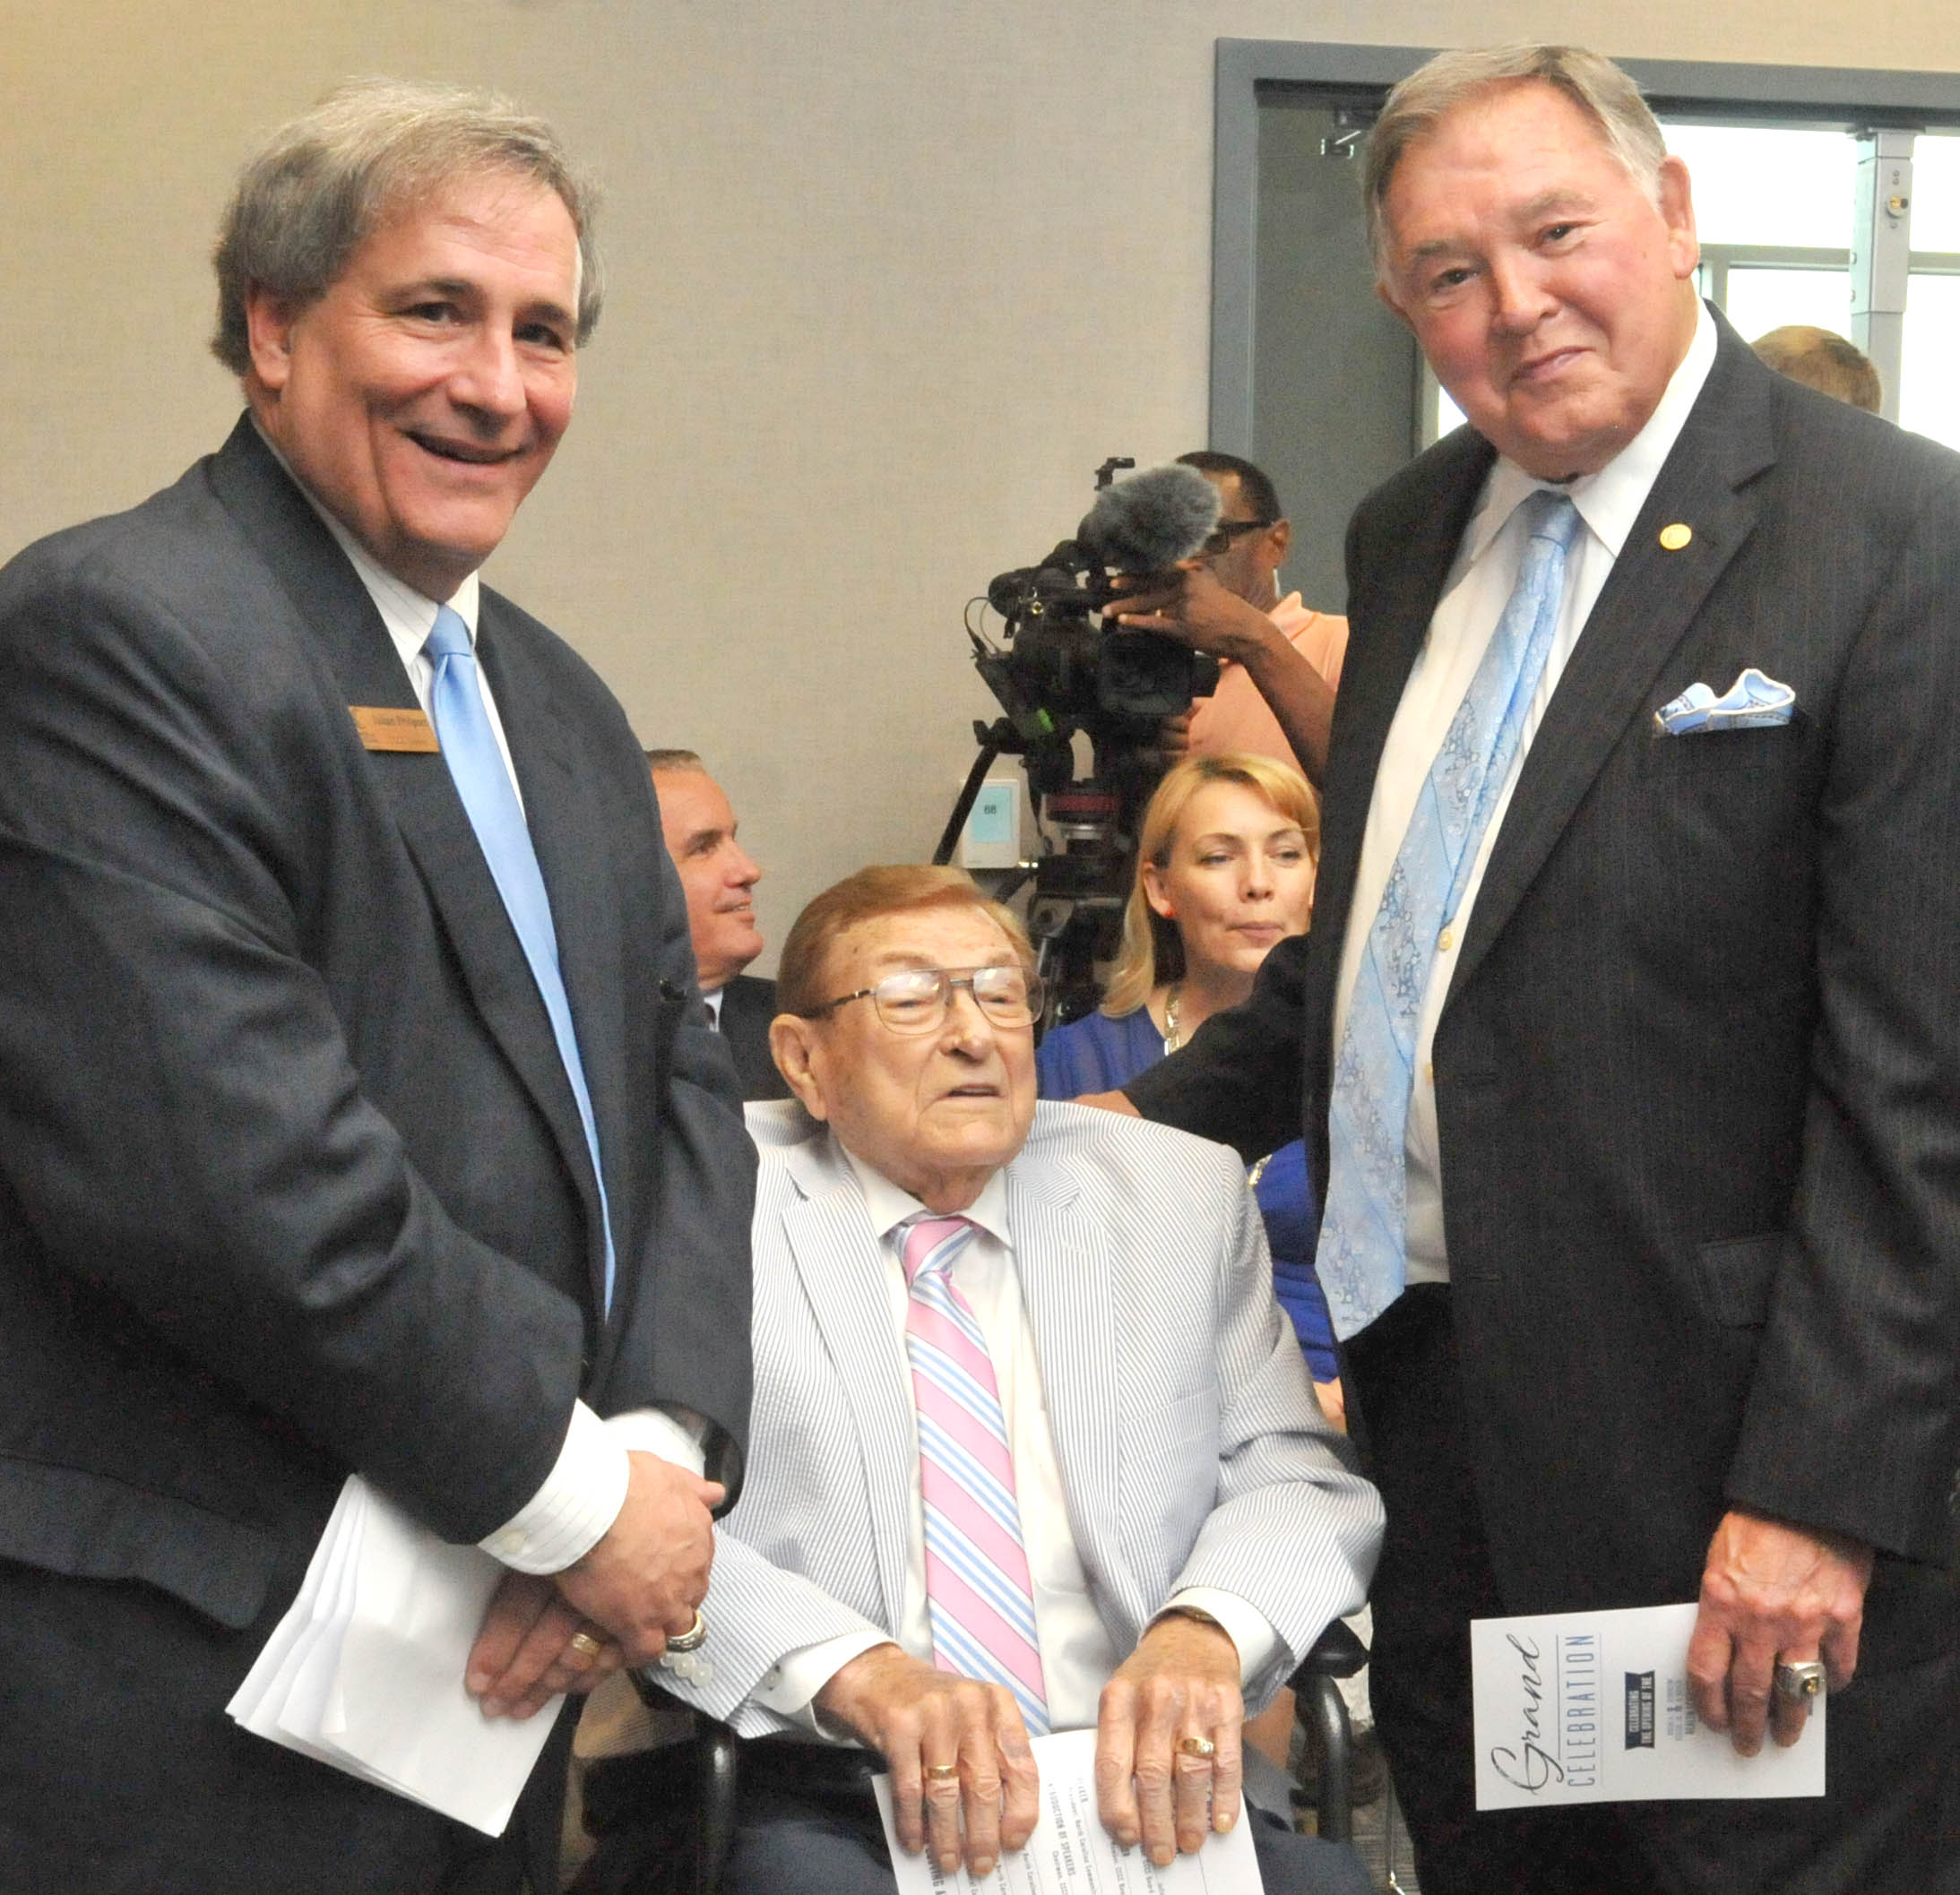 Click to enlarge,  Oscar A. Keller Jr. (center) visits with Julian Philpott (left), Chairman of the Central Carolina Community College Board of Trustees, and former N.C. Secretary of State and Attorney General Rufus Edmisten (right) at the CCCC Grand Celebration. 